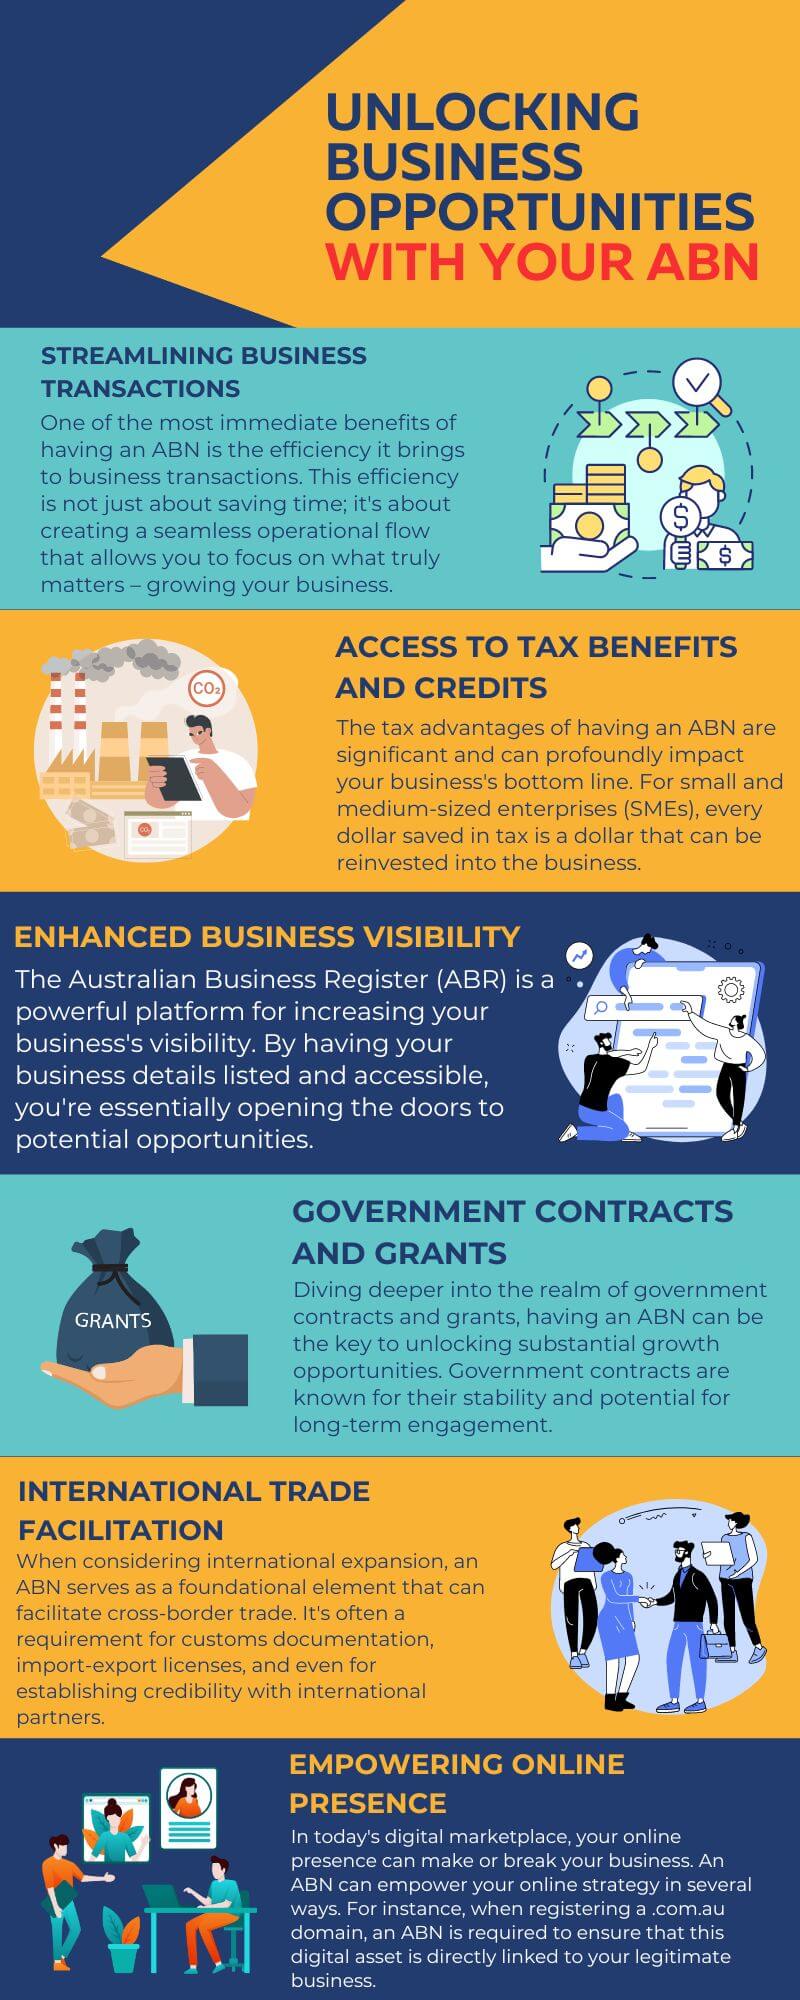 Unlocking Business Opportunities With Your ABN(1)